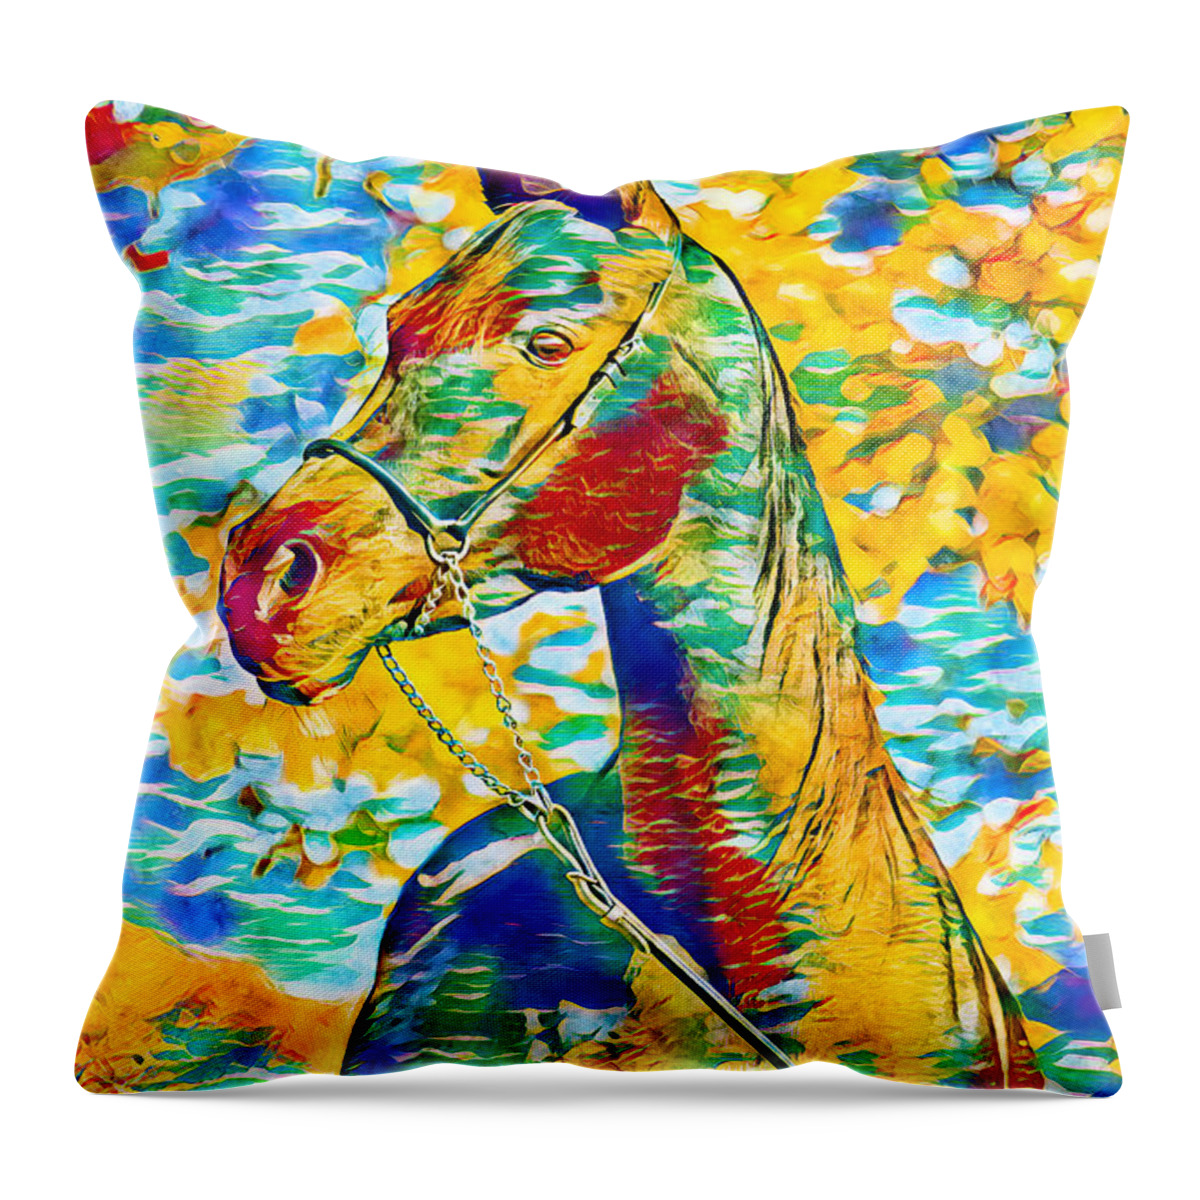 Arabian Horse Throw Pillow featuring the digital art Arabian horse colorful portrait in blue, cyan, green, yellow and red by Nicko Prints